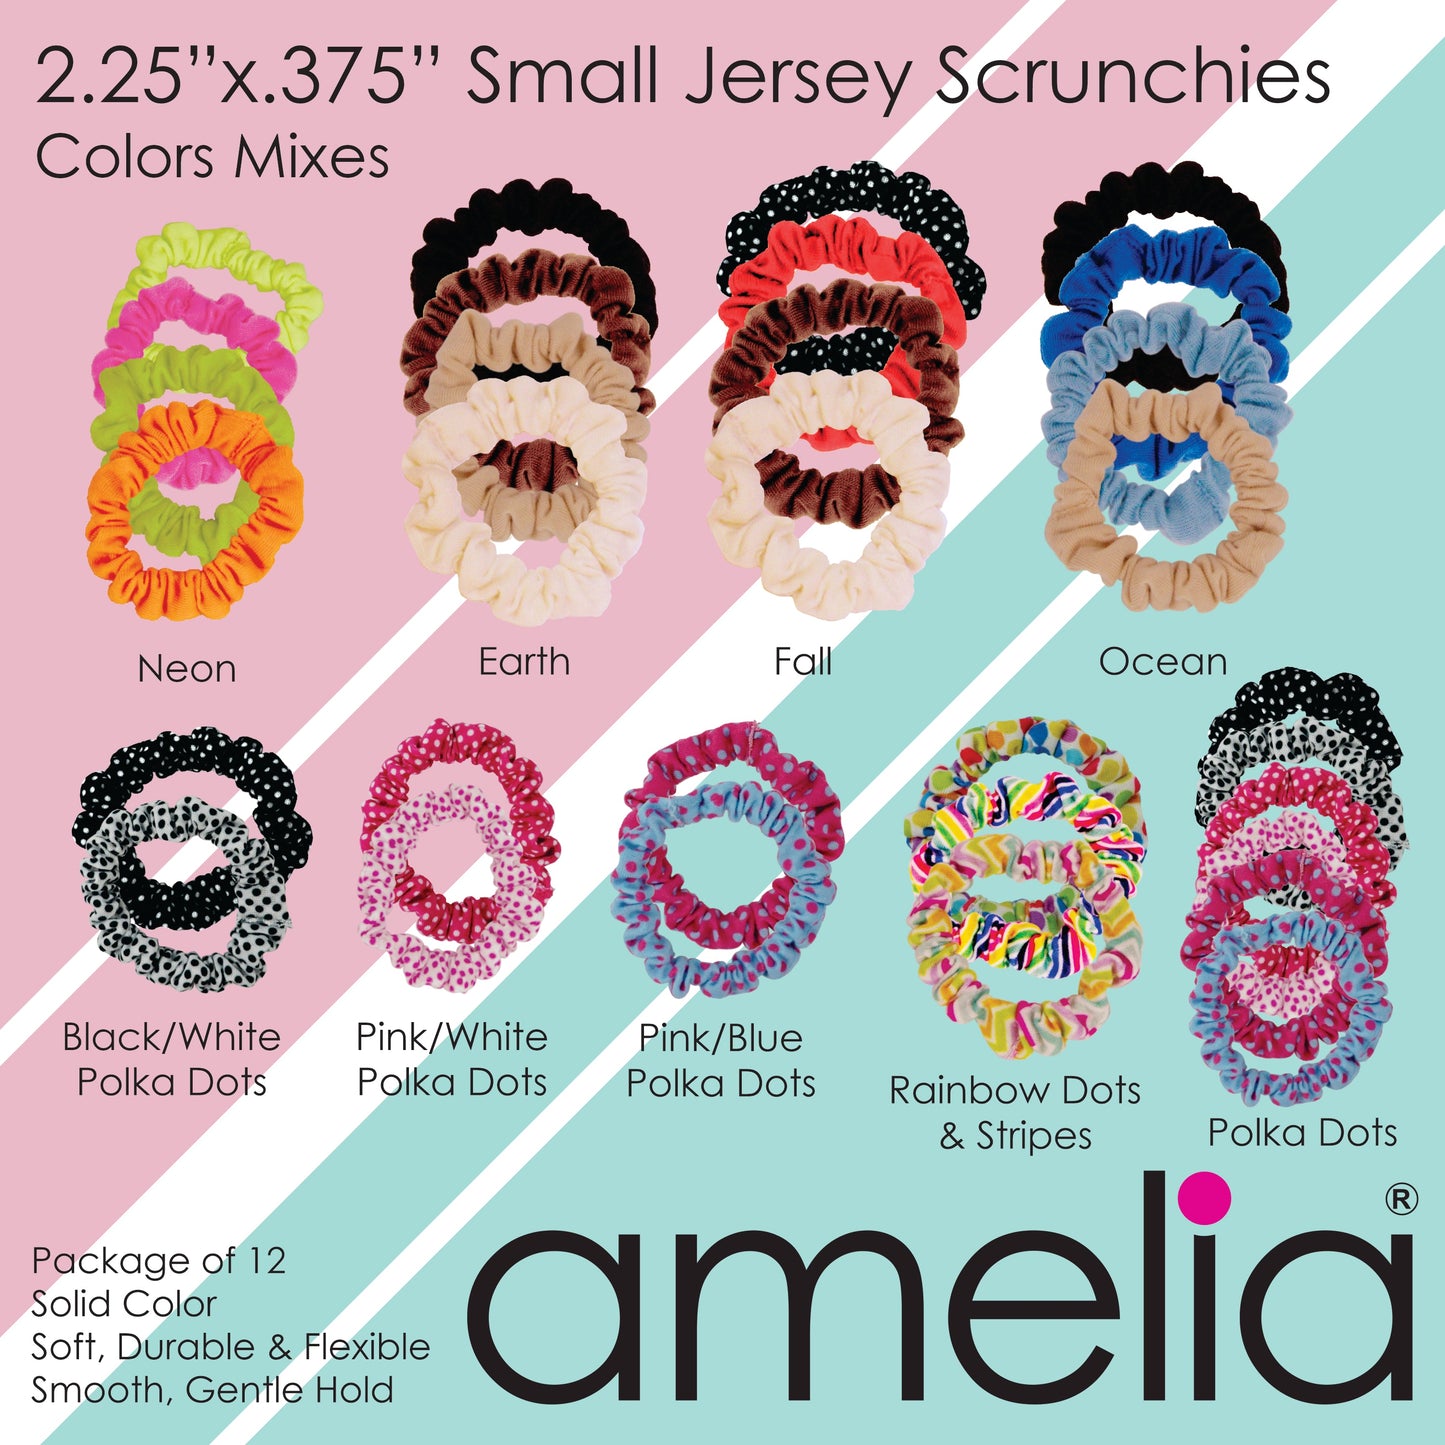 Amelia Beauty, Black and White Polka Dot Mix Jersey Scrunchies, 2.25in Diameter, Gentle on Hair, Strong Hold, No Snag, No Dents or Creases. 12 Pack